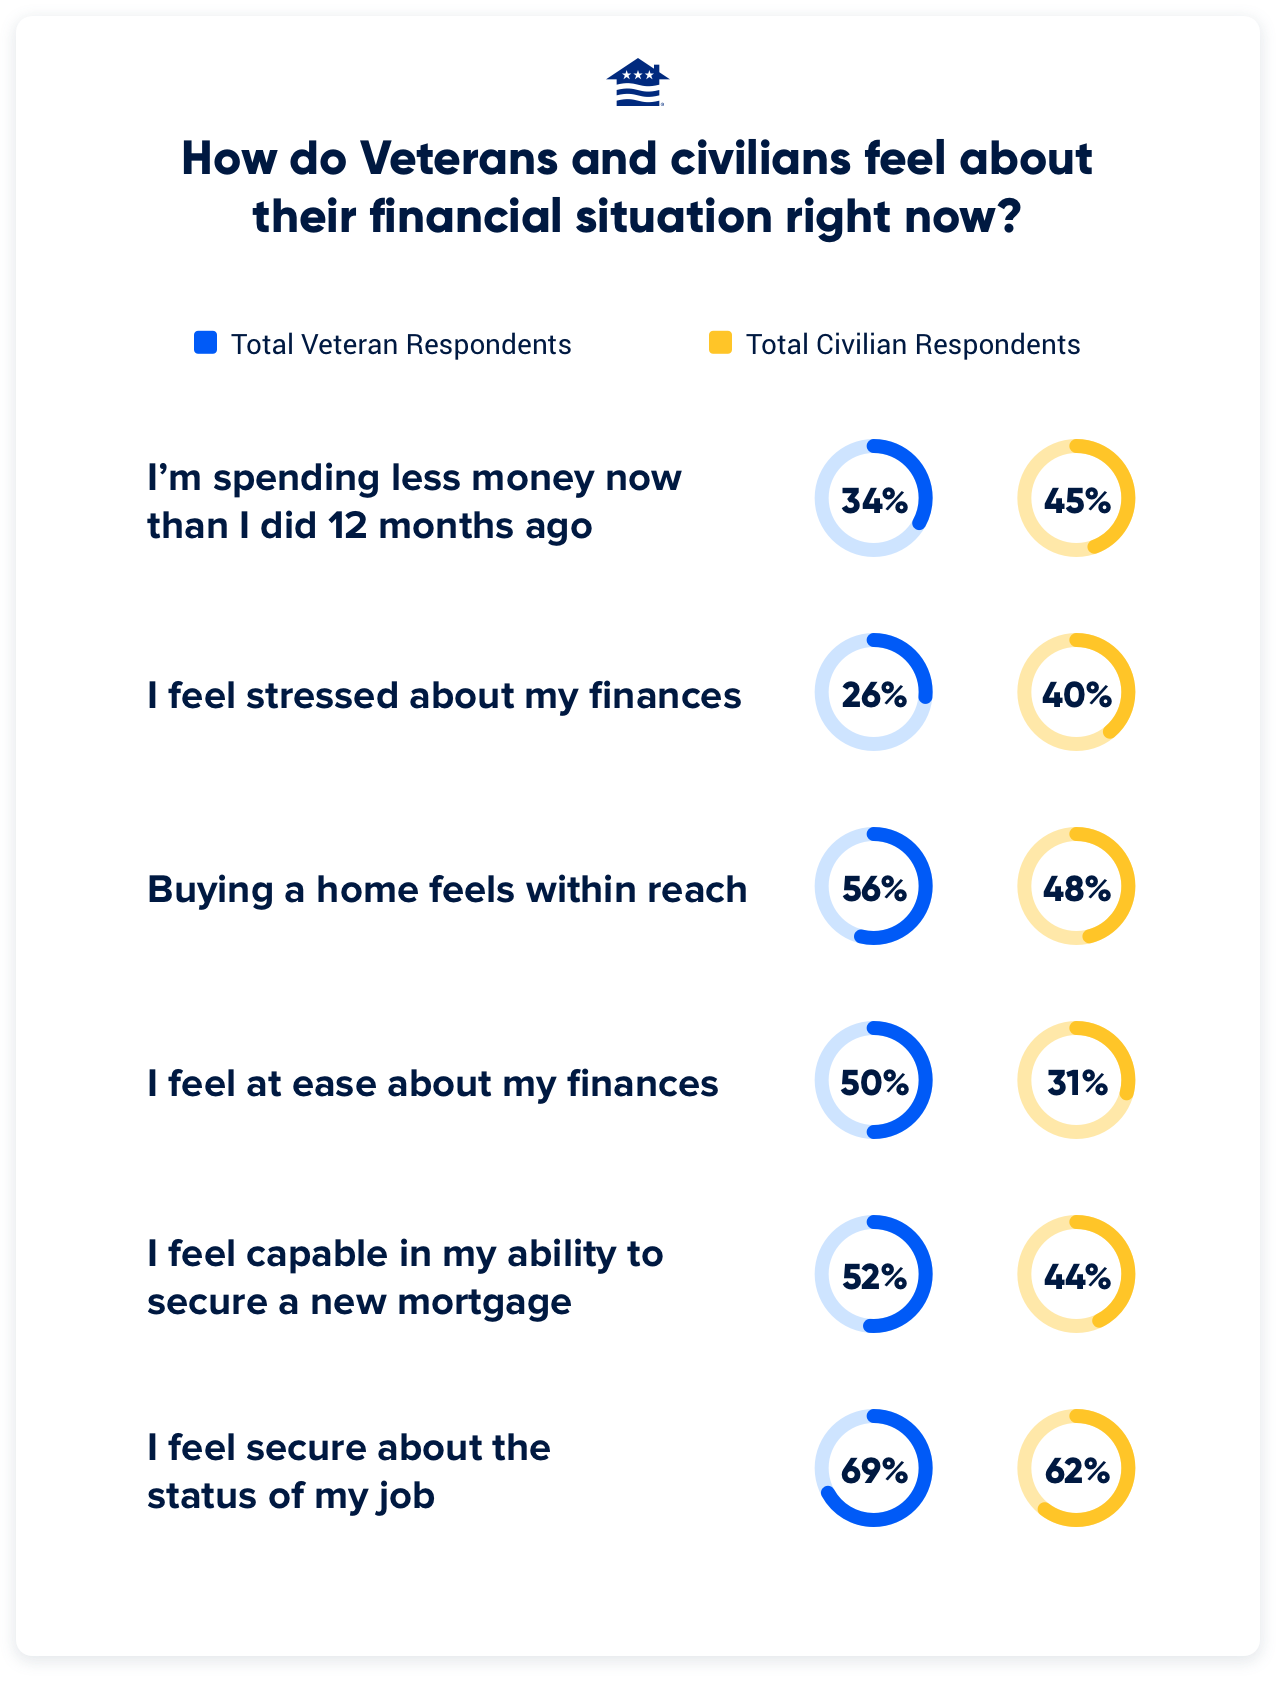 This chart shows a breakdown between Veterans and civilians regarding how they feel about their financial situation right now. Across the board, whether it's stress about finances, feeling capable of securing a new mortgage or how much money they're spending compared to a year ago, civilians say they're worse off than Veterans.